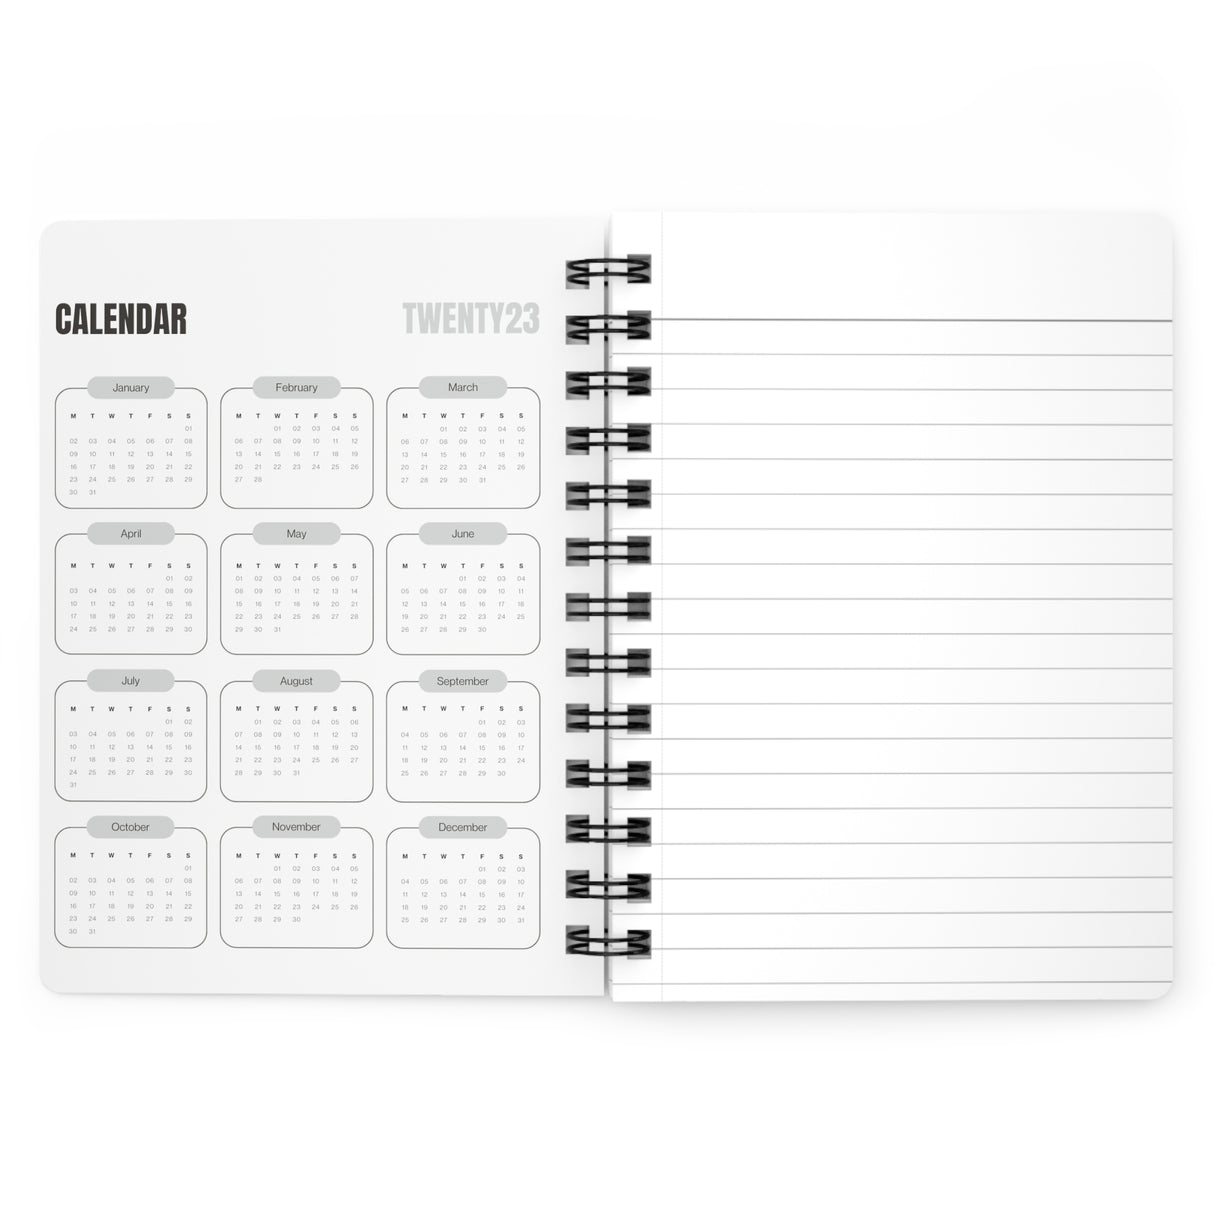 Official Spiral Bound Notebooks and Journals with 2023-2024 Year-at-a-Glance Calendar